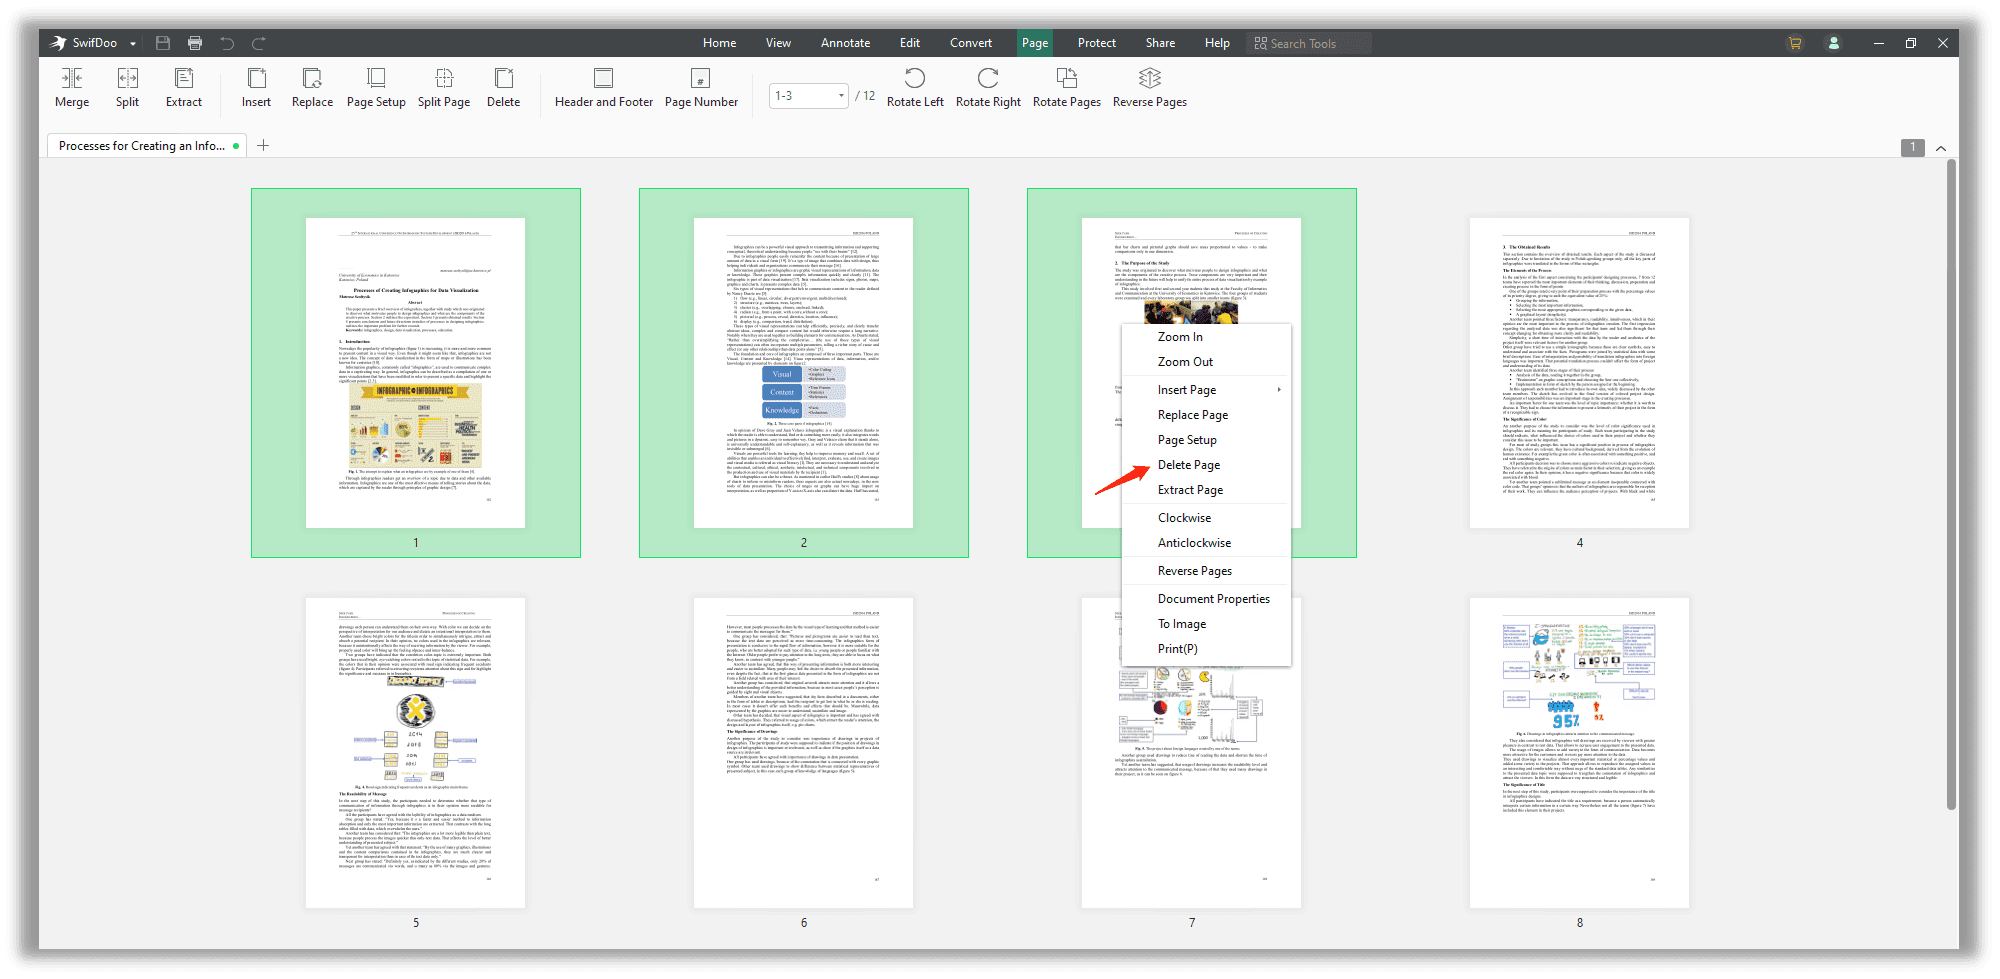 How to delete pages from a PDF in SwifDoo PDF